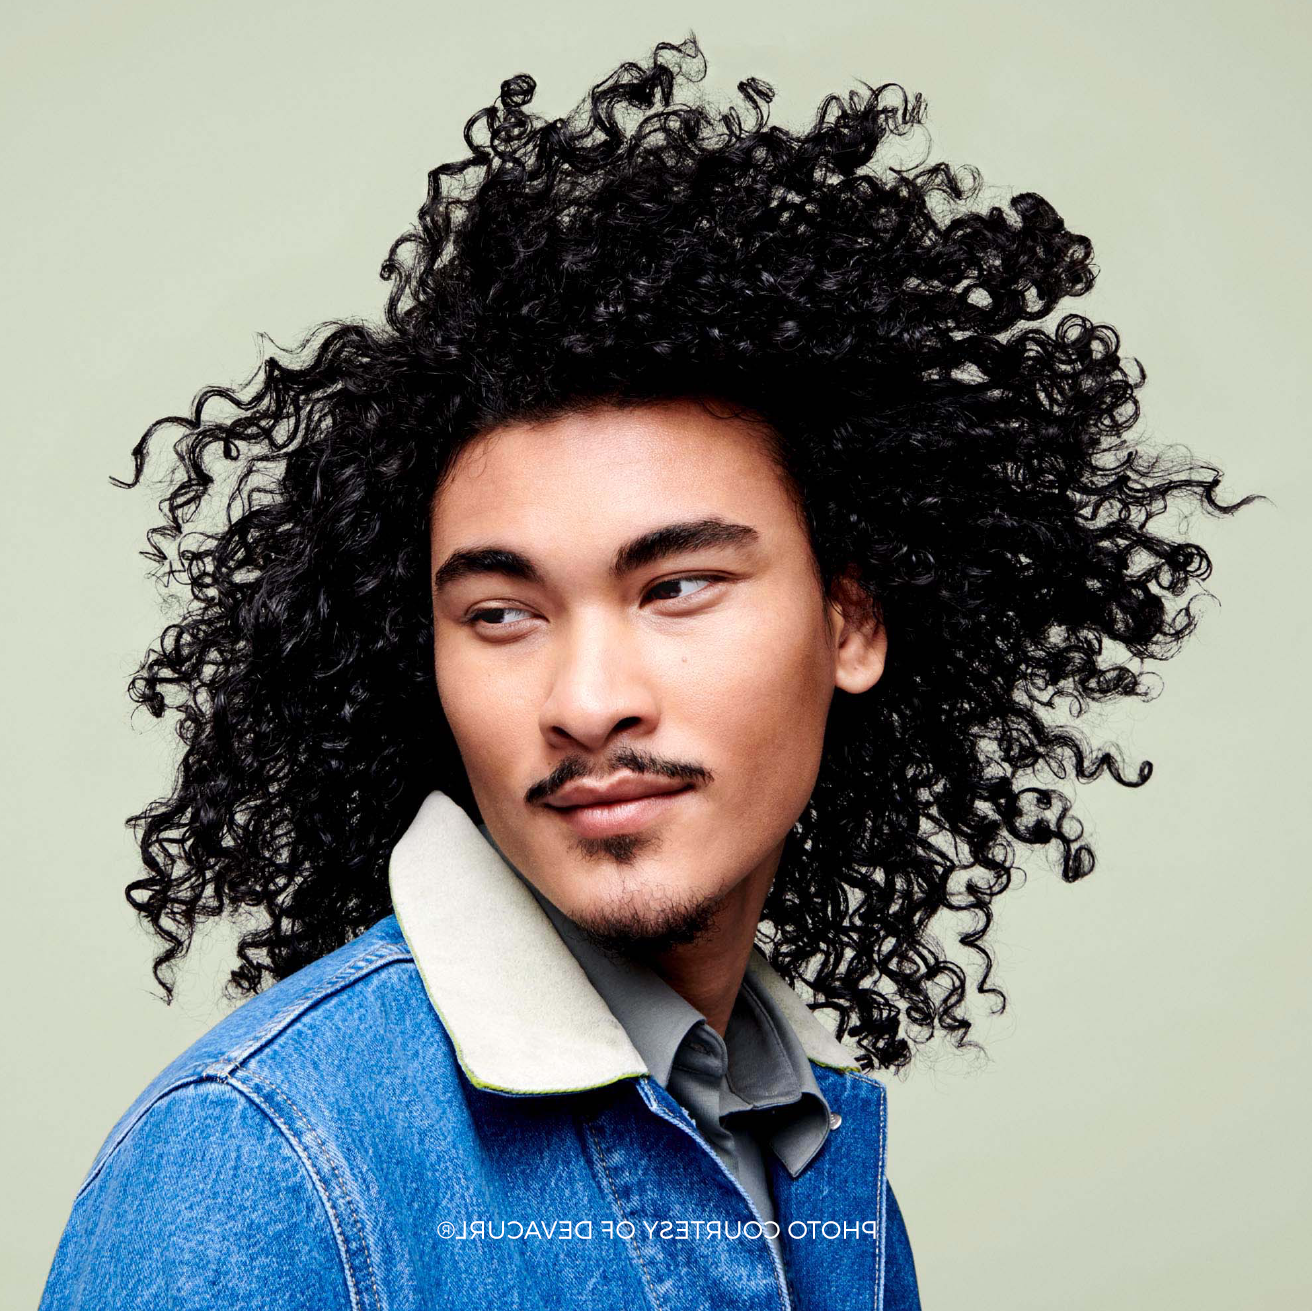 An image of a man with curly hair